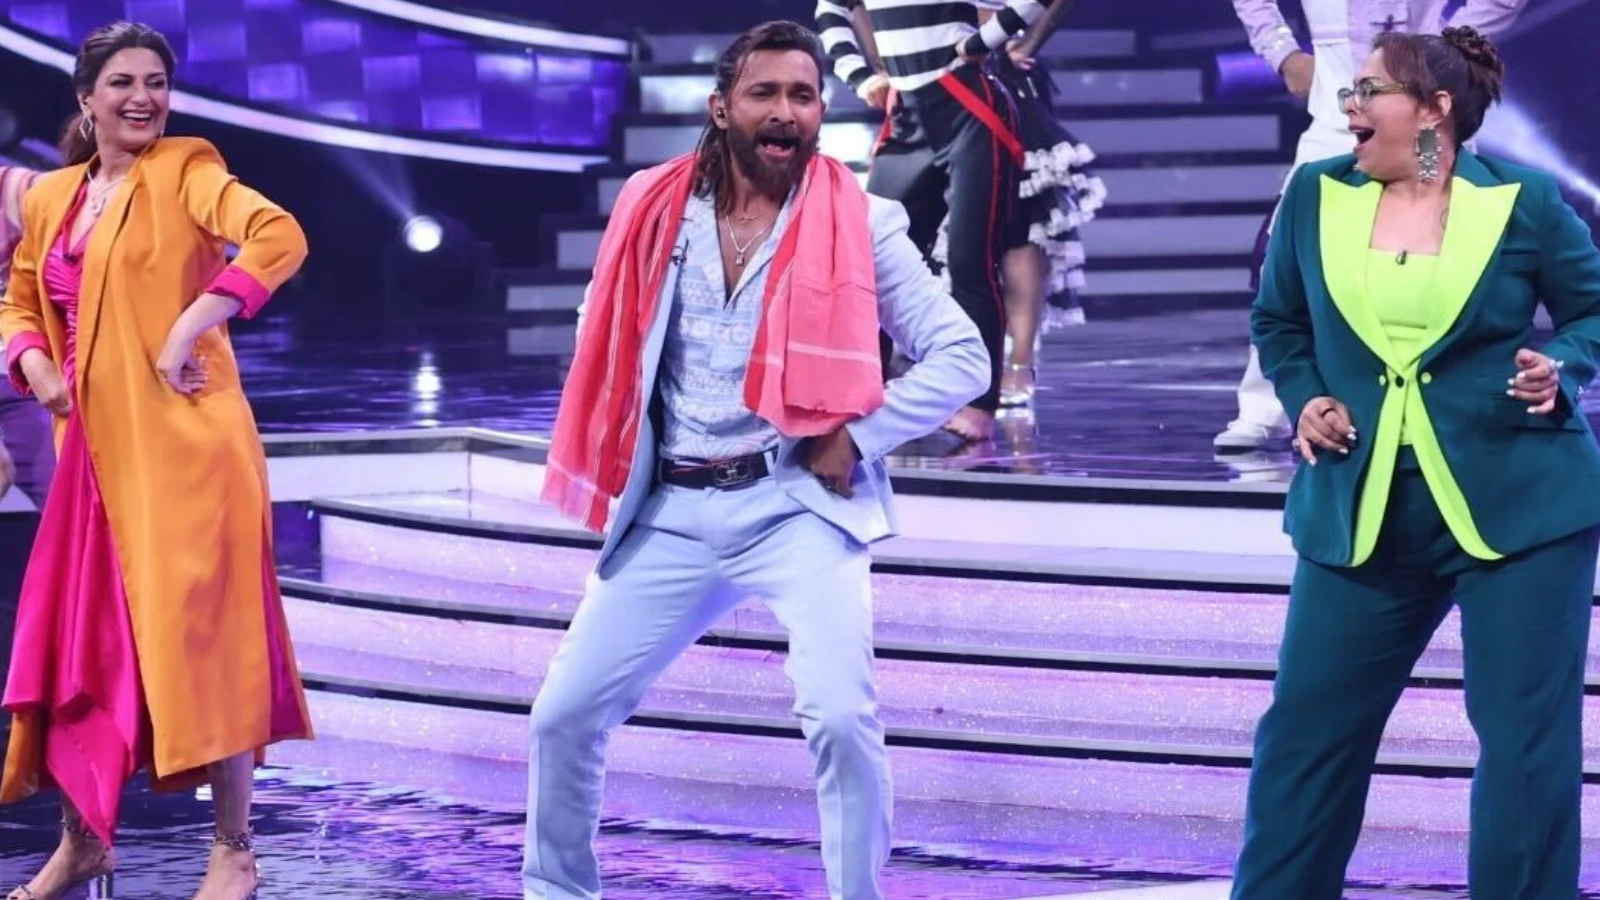 Gita Ma Xxx Video - India's Best Dancer 3: Contestants to woo Sonali Bendre, Geeta Kapur,  Terence Lewis with Bachchan fever | PINKVILLA